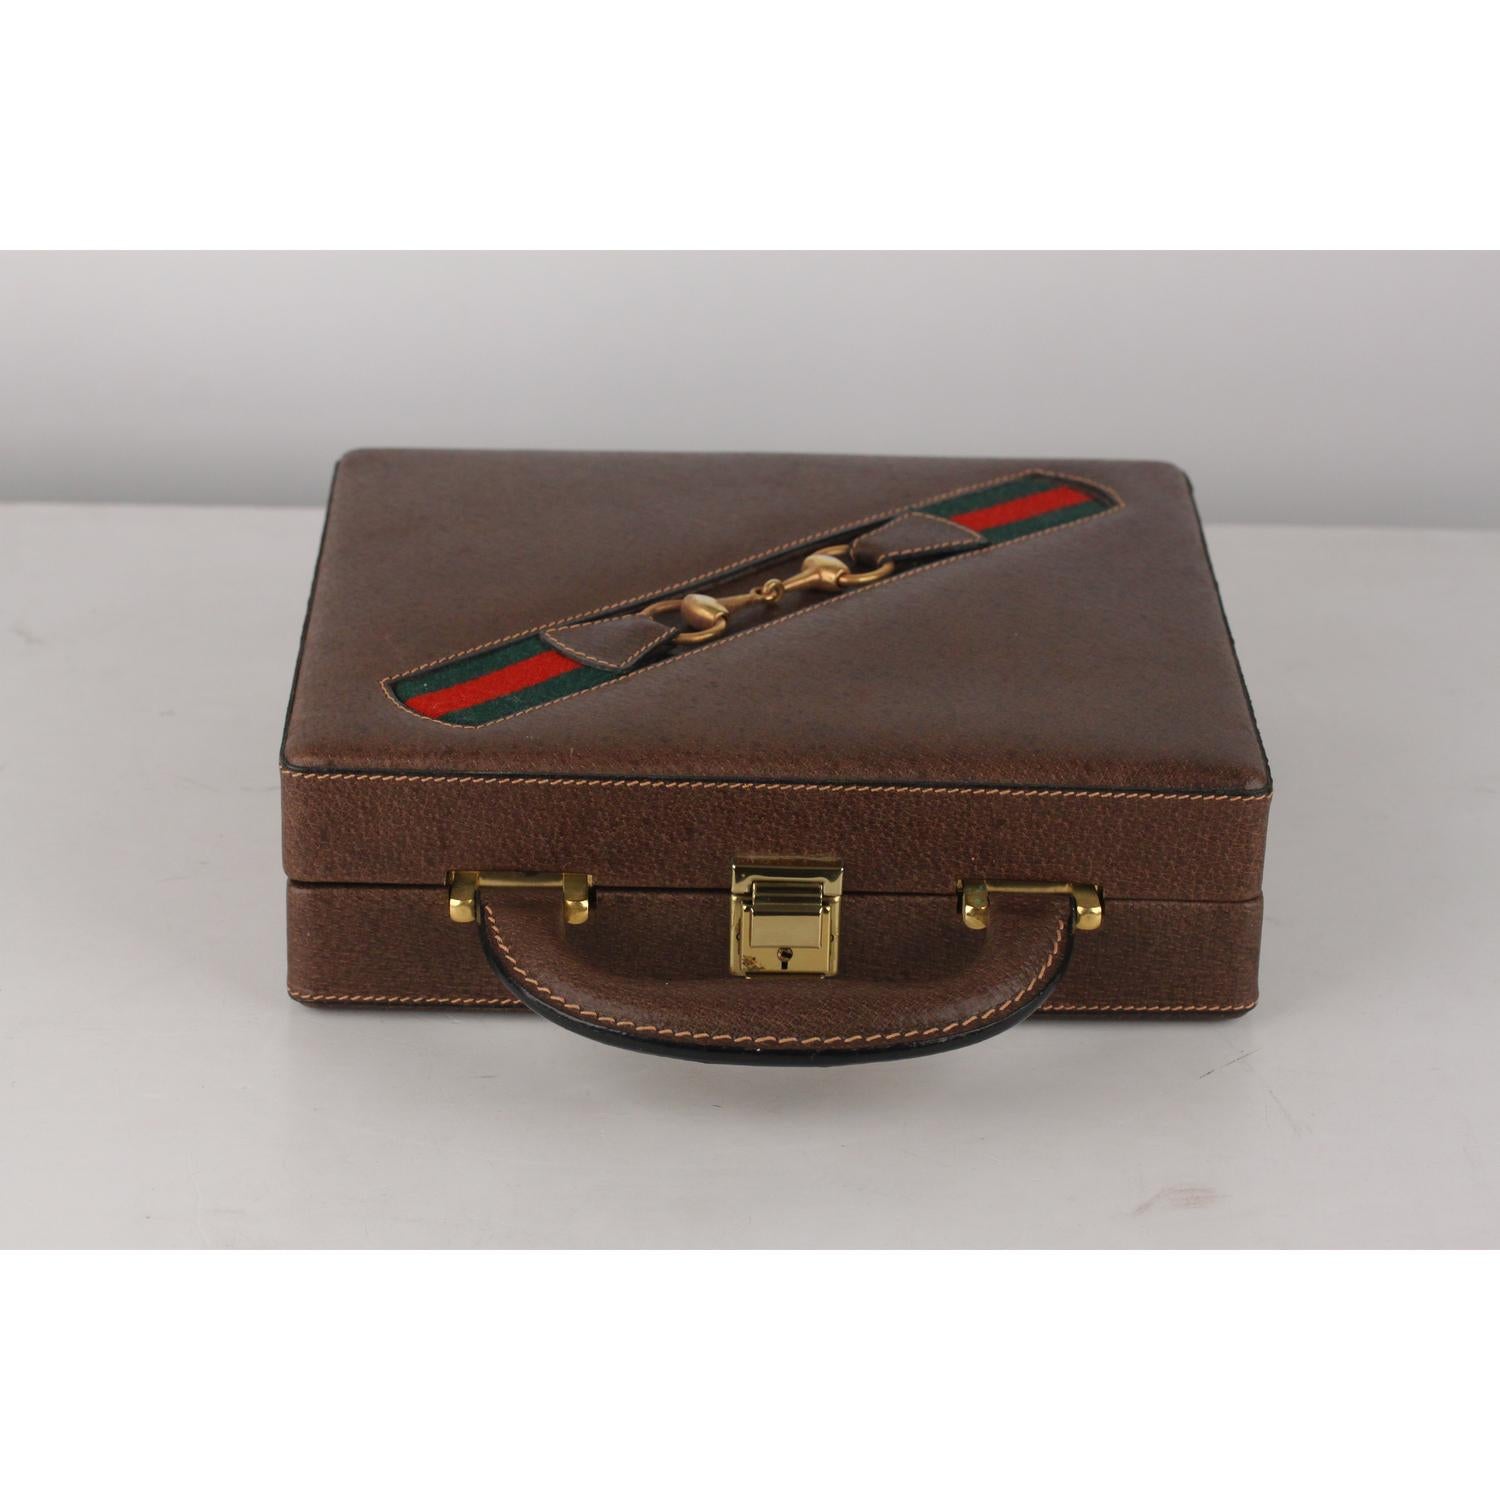 Rare travel poker set was made by Gucci, from the 70s.  The travel case is made from dark pigskin leather and features Gucci's iconic green/red/green striping with a gold metal horsebit. the case is lined in green felt and it hs one divider tray. 